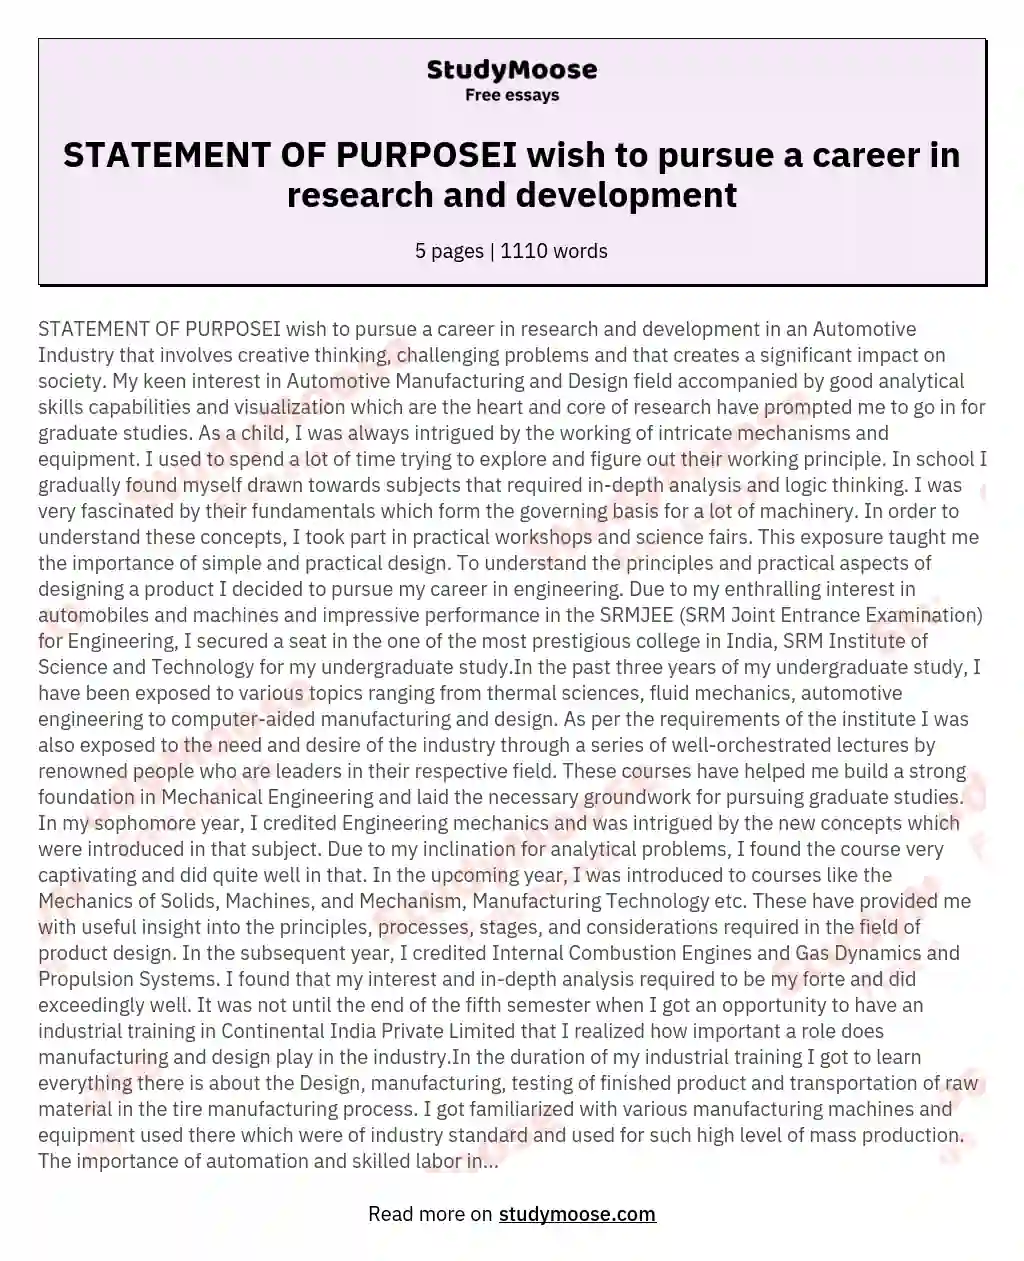 STATEMENT OF PURPOSEI wish to pursue a career in research and development essay